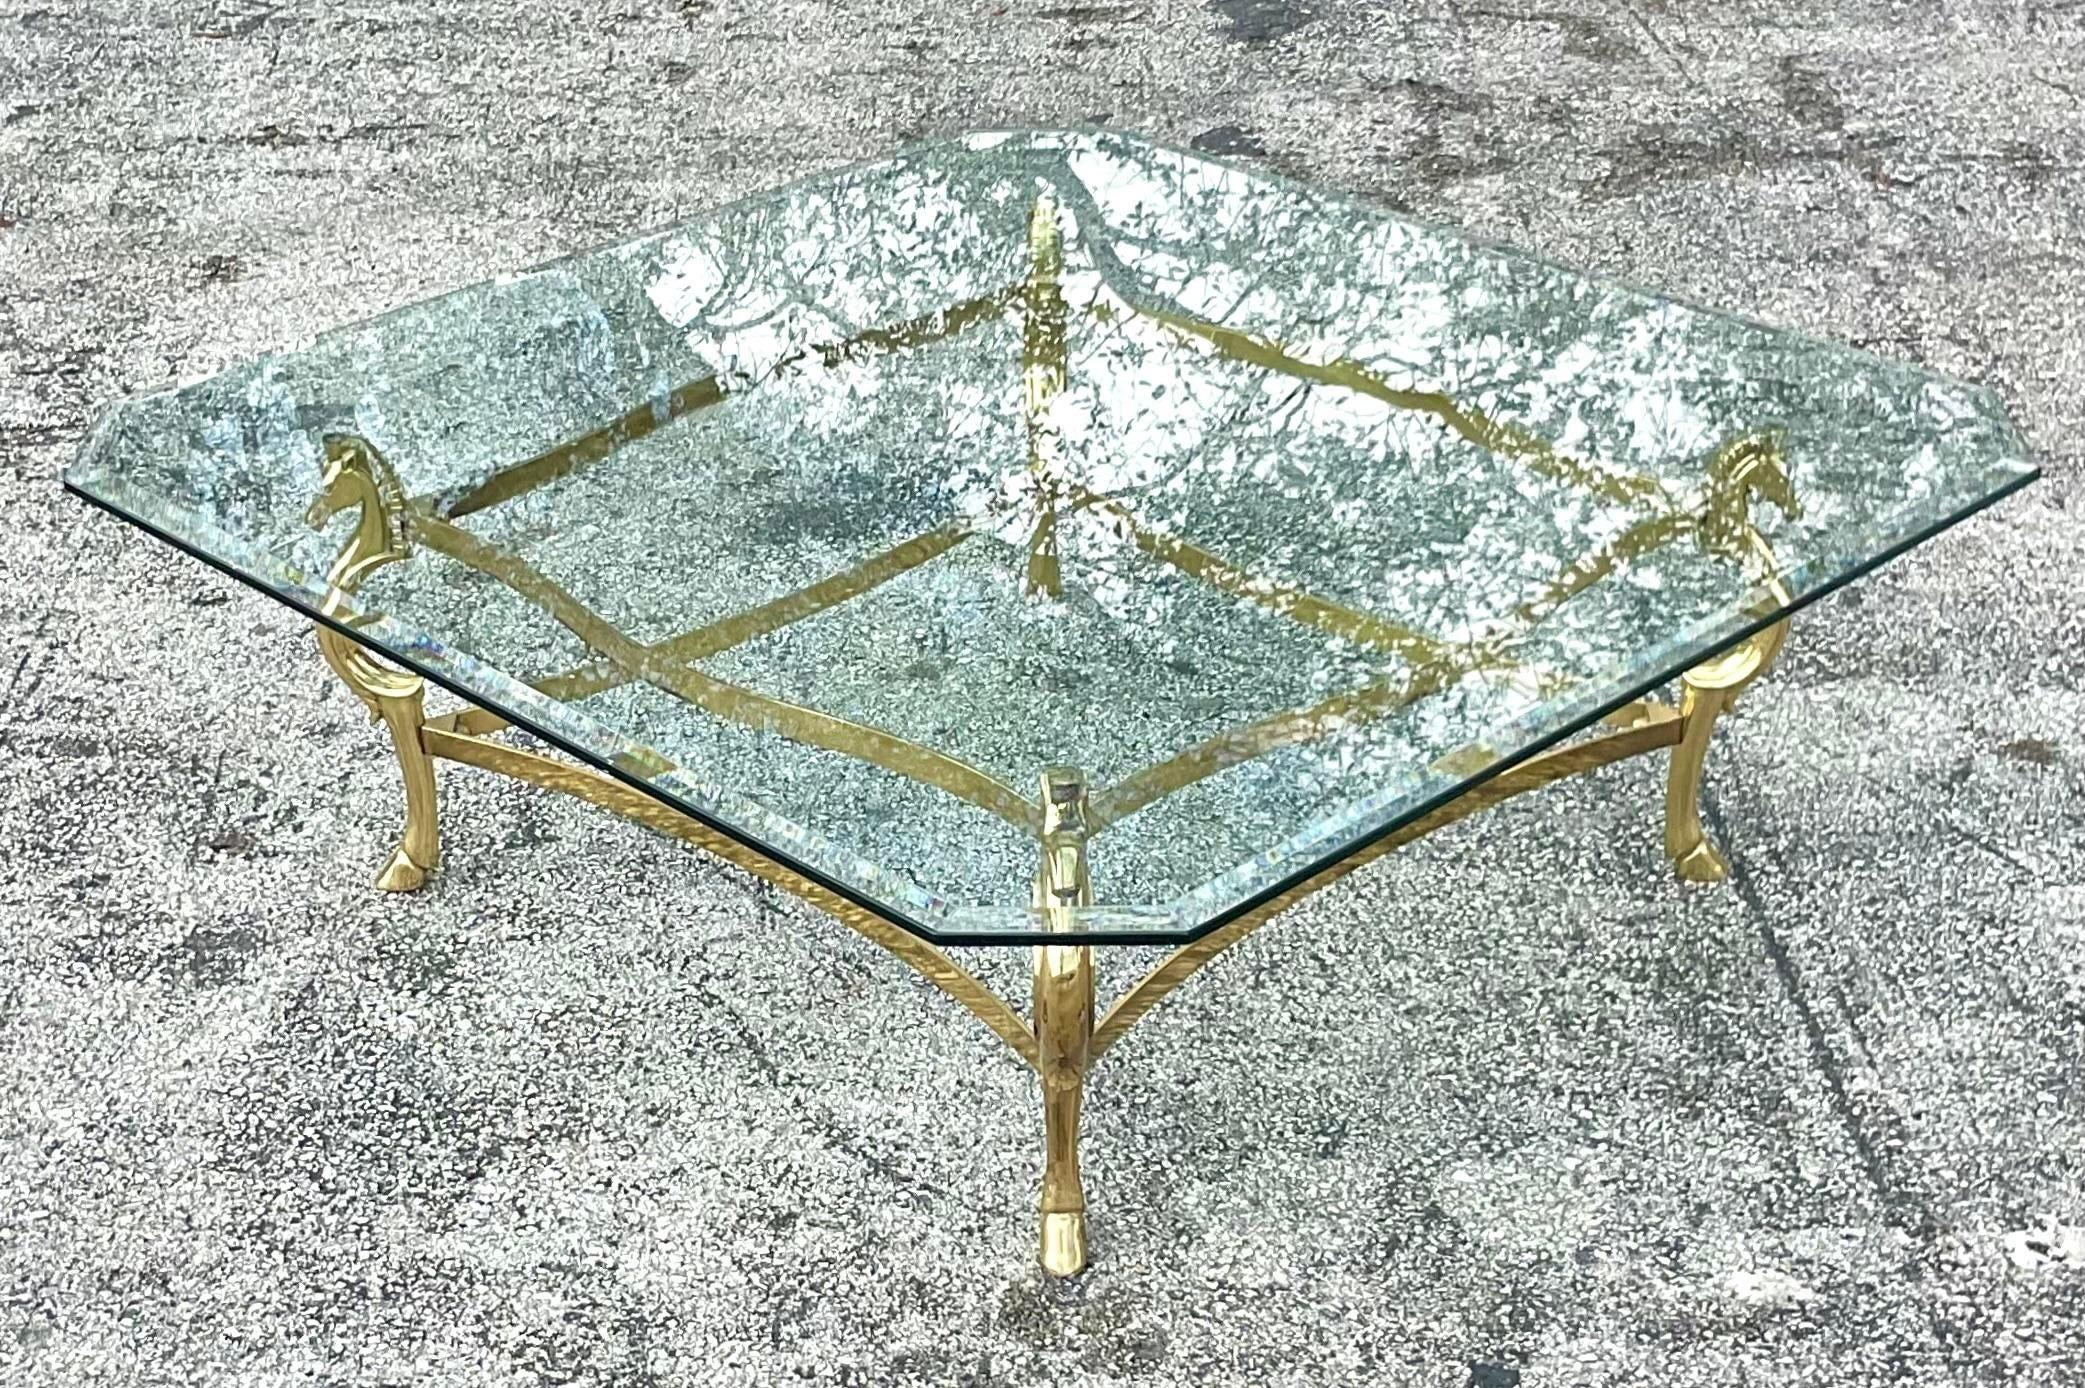 Late 20th Century Vintage Regency Polished Brass Horse Head Coffee Table In Good Condition For Sale In west palm beach, FL